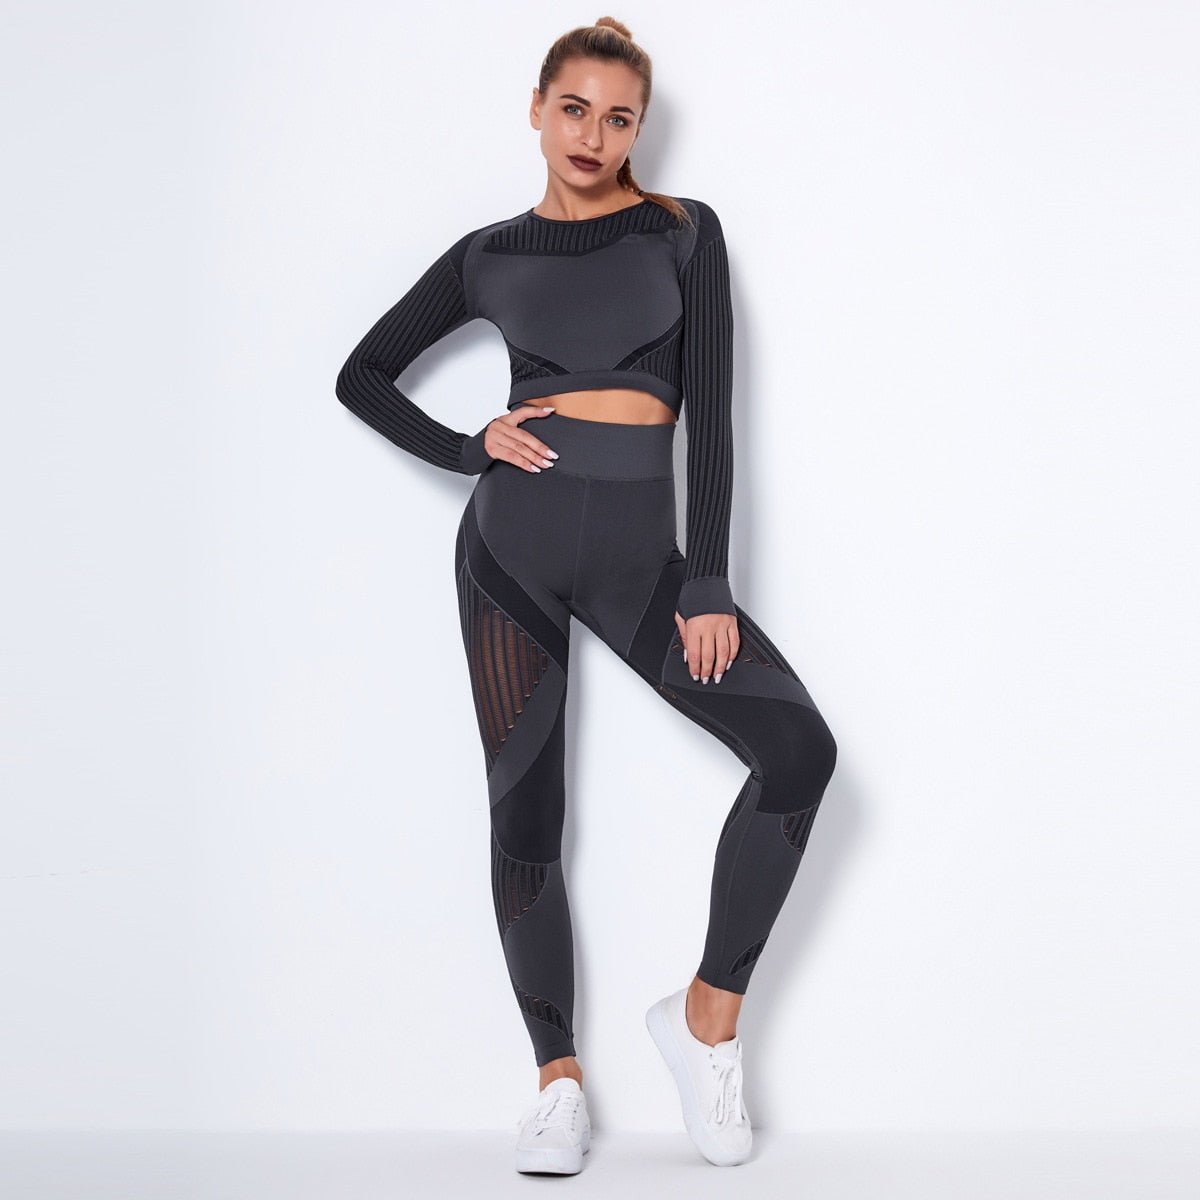 YWDJ 2 Piece Outfits for Women Dressy Ladies Seamless Hollow Yoga Long  Sleeve Yoga Suit Sports Fitness Running Yoga Set Black M 